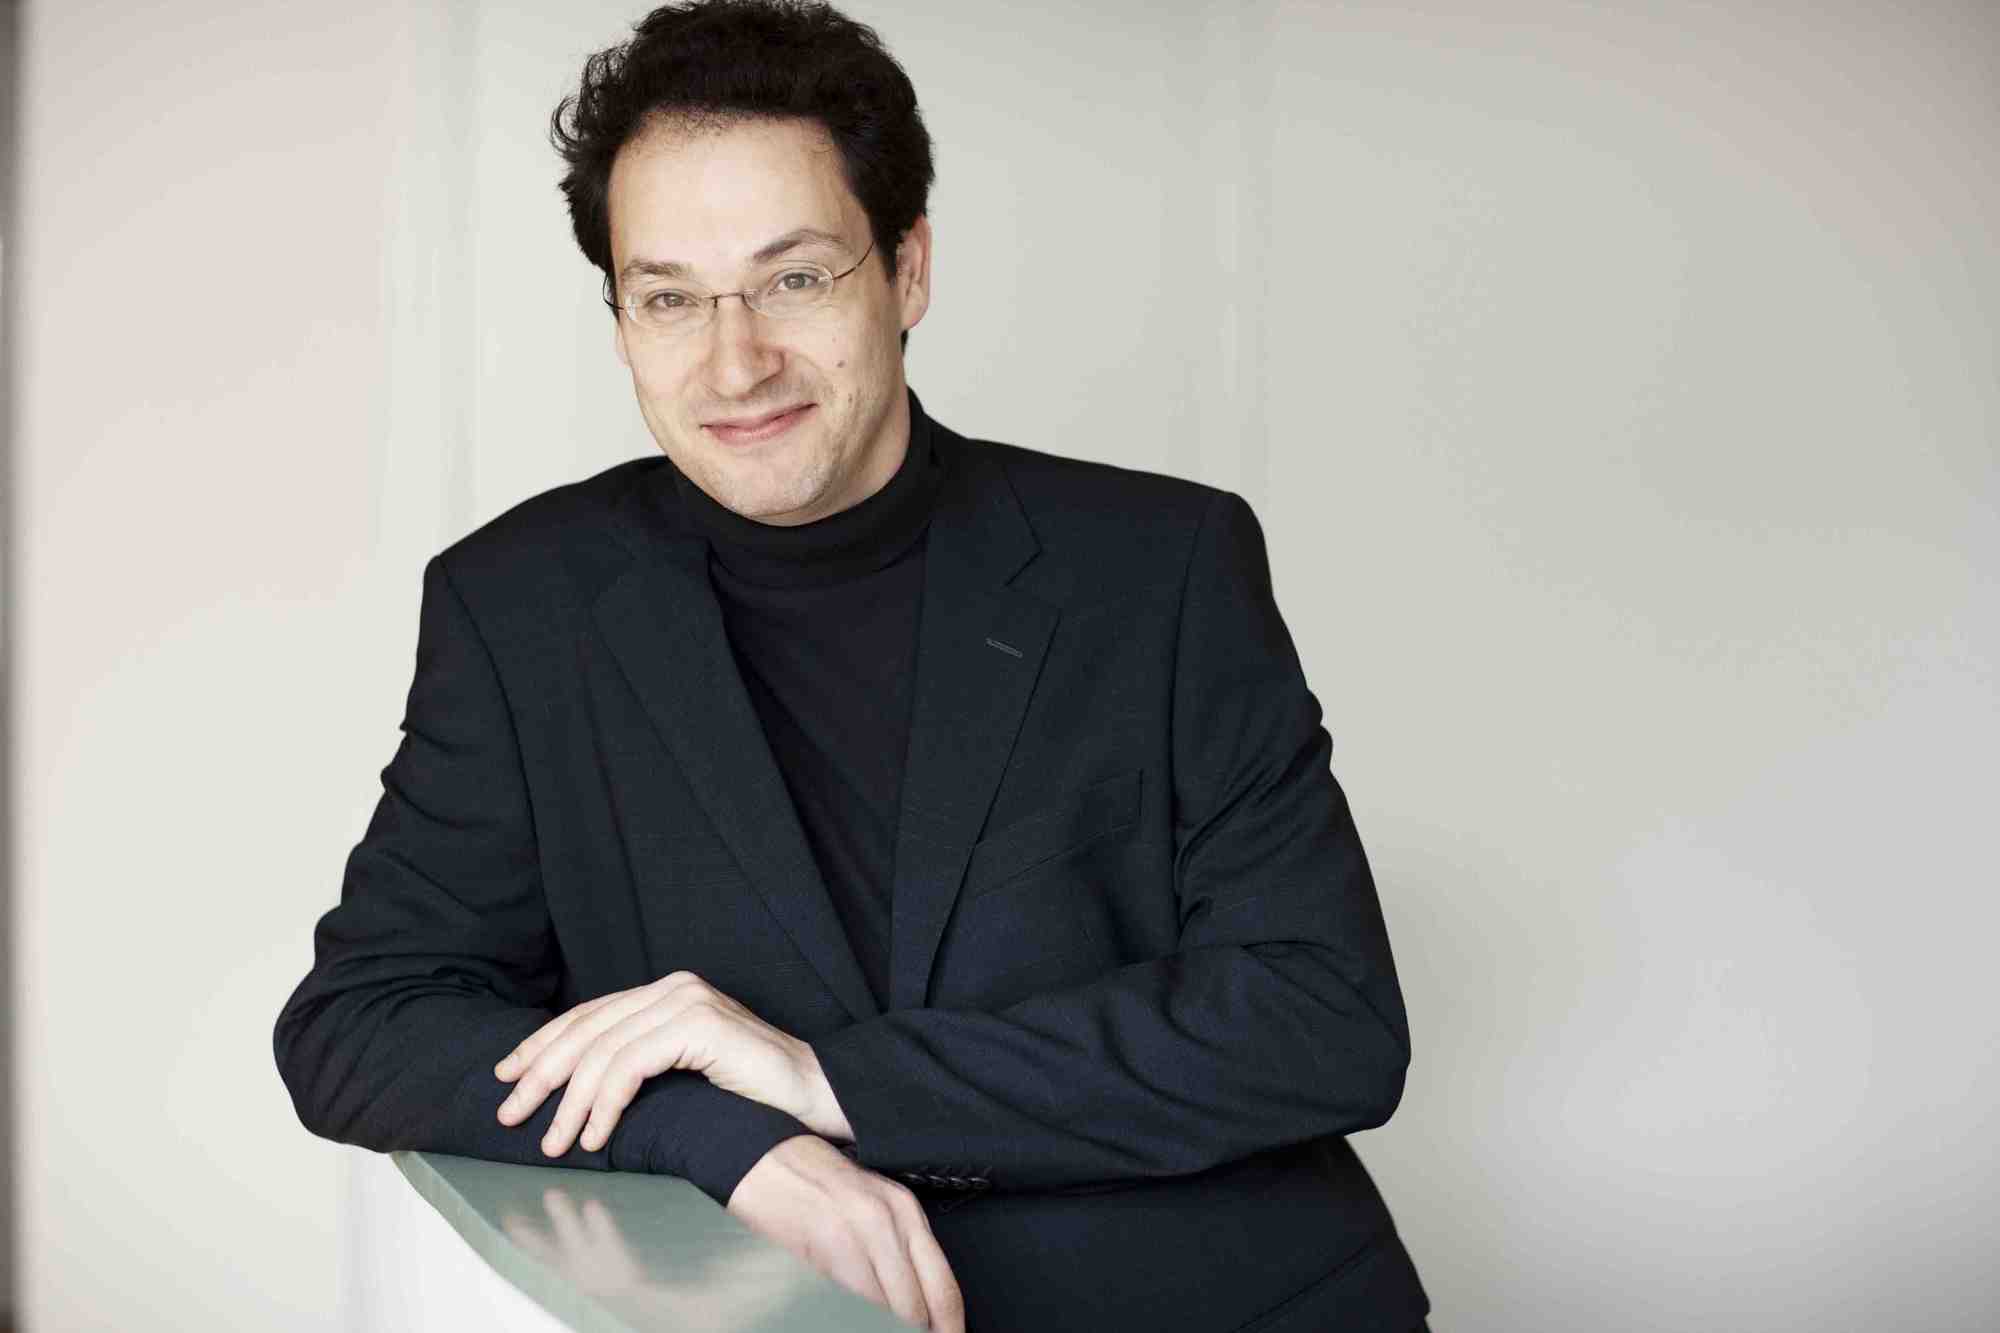 Pianist Shai Wosner demonstrated his world-renowned ability to combine technical  ability with an innate feel for the music.